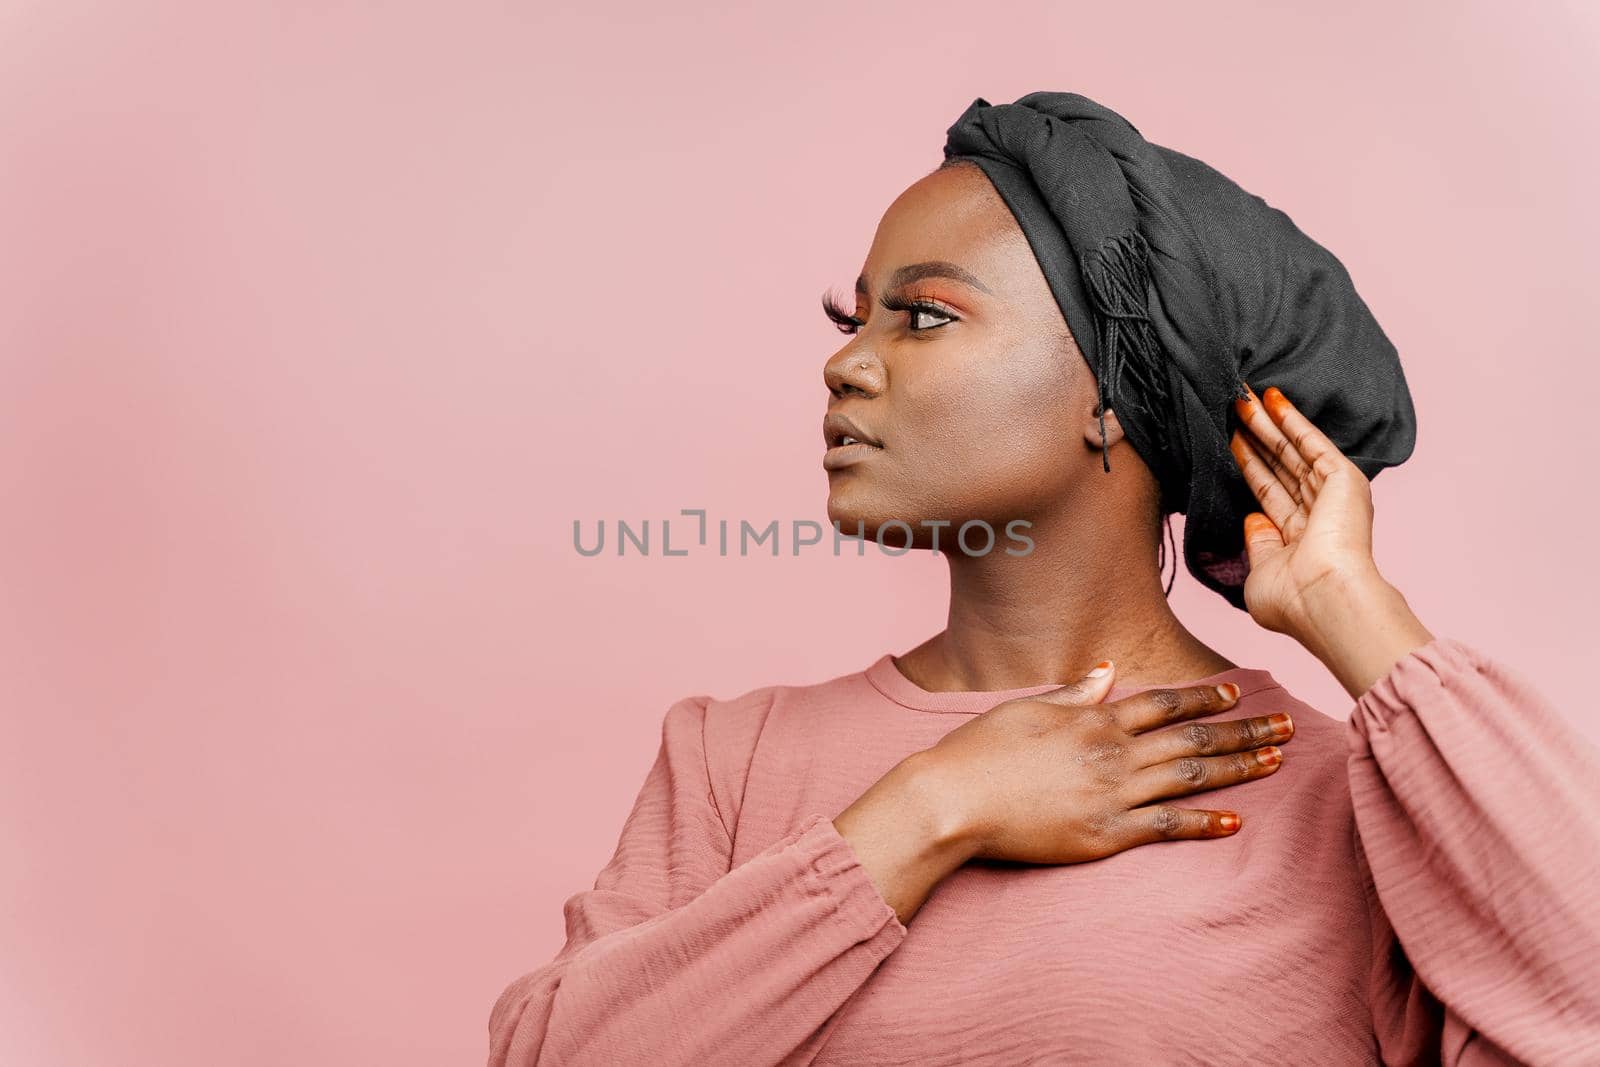 Muslim woman with closed eyes close-up. Relax and meditation. African black attractive girl portrait isolated on pink background